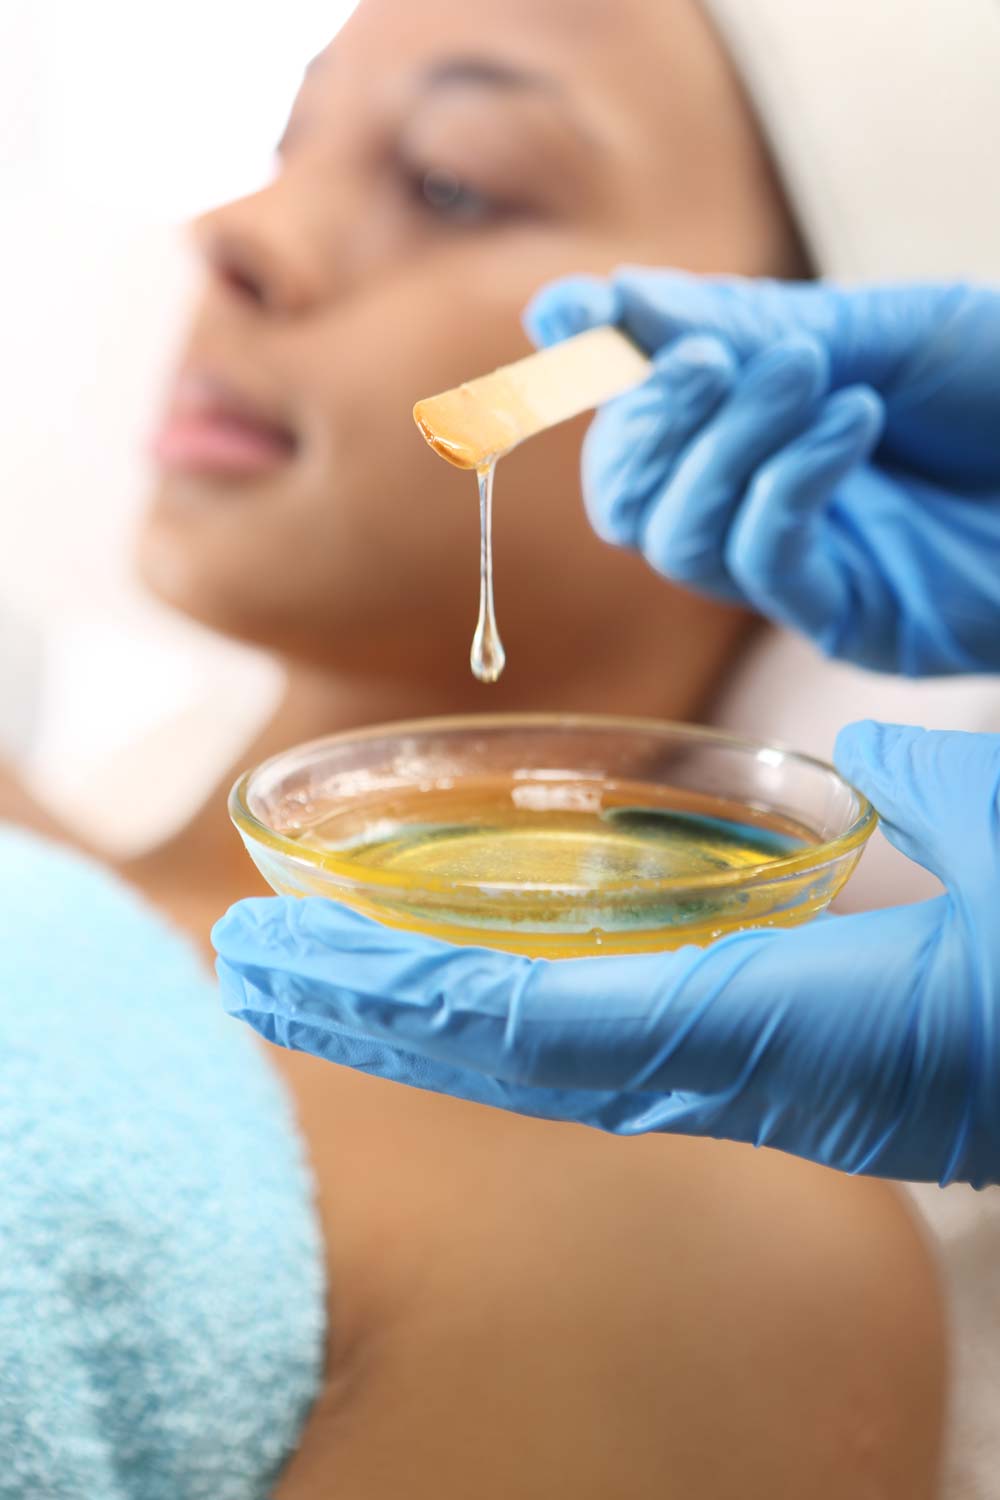 Woman-in-a-beauty-salon-waxing-during-surgery